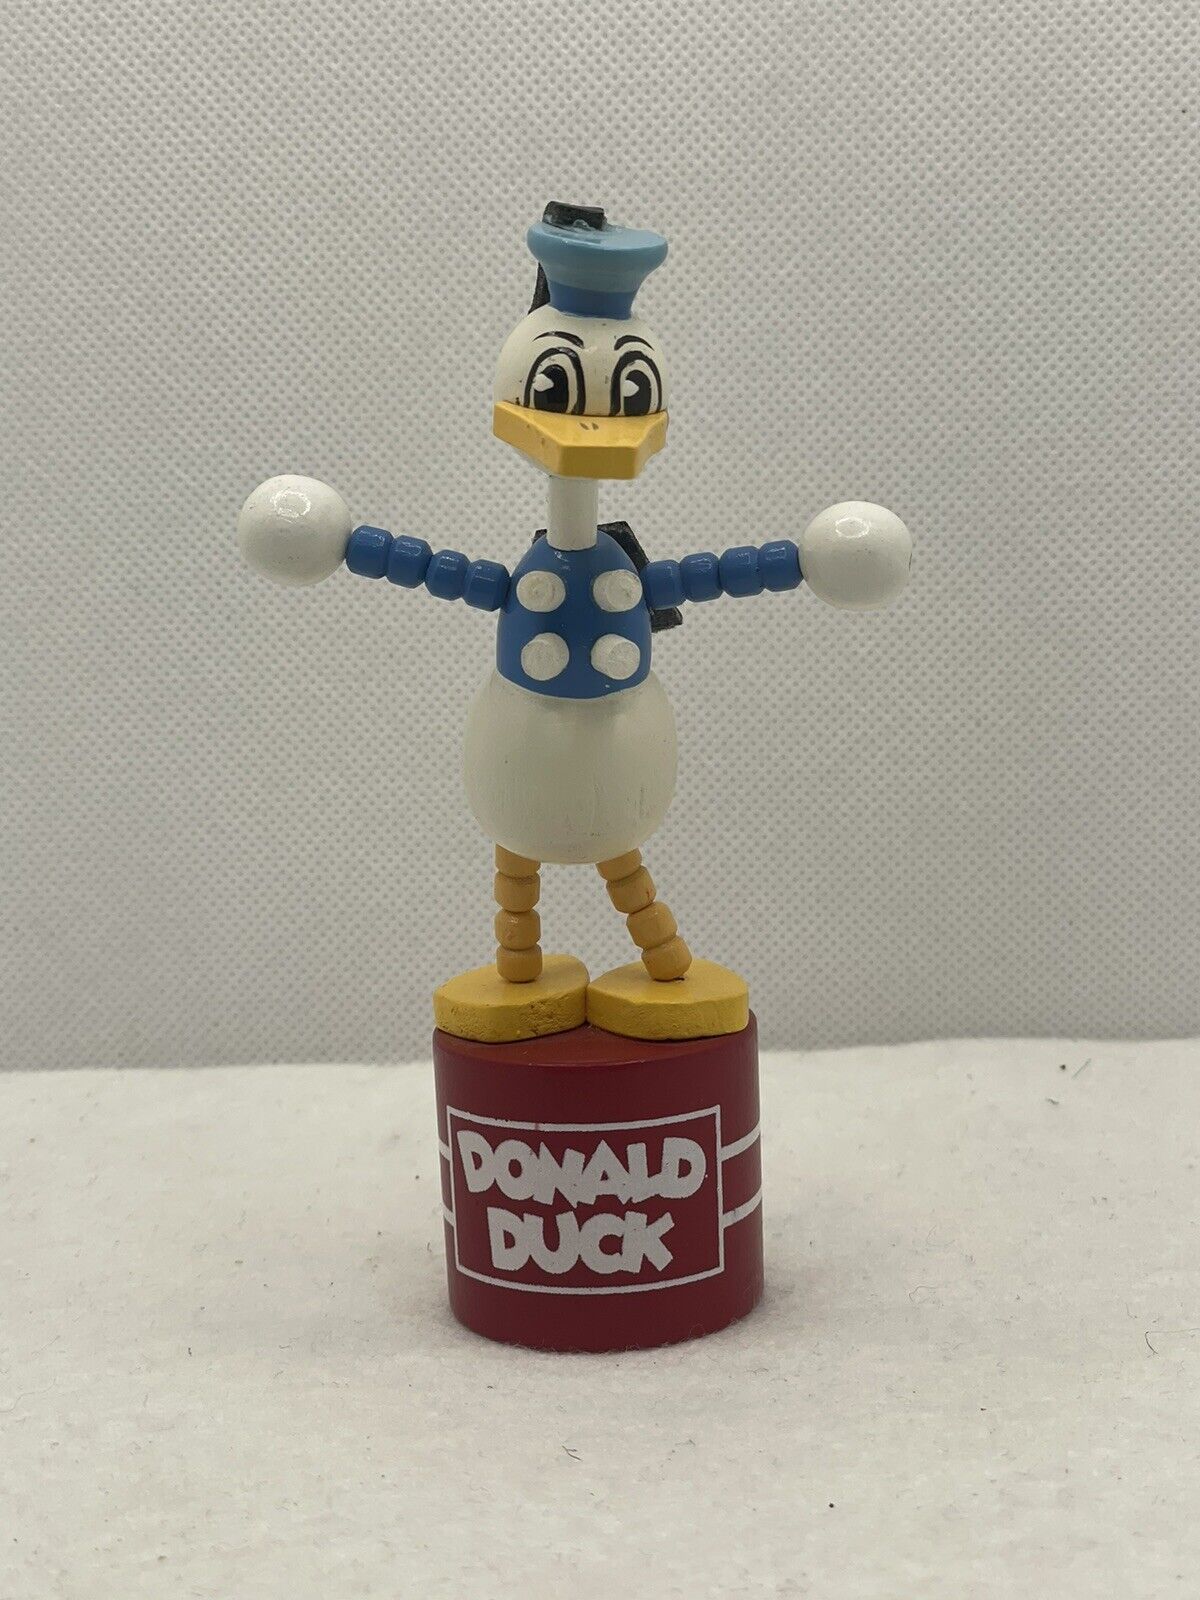 EXTREMELY RARE VINTAGE Disney Push Donald Duck